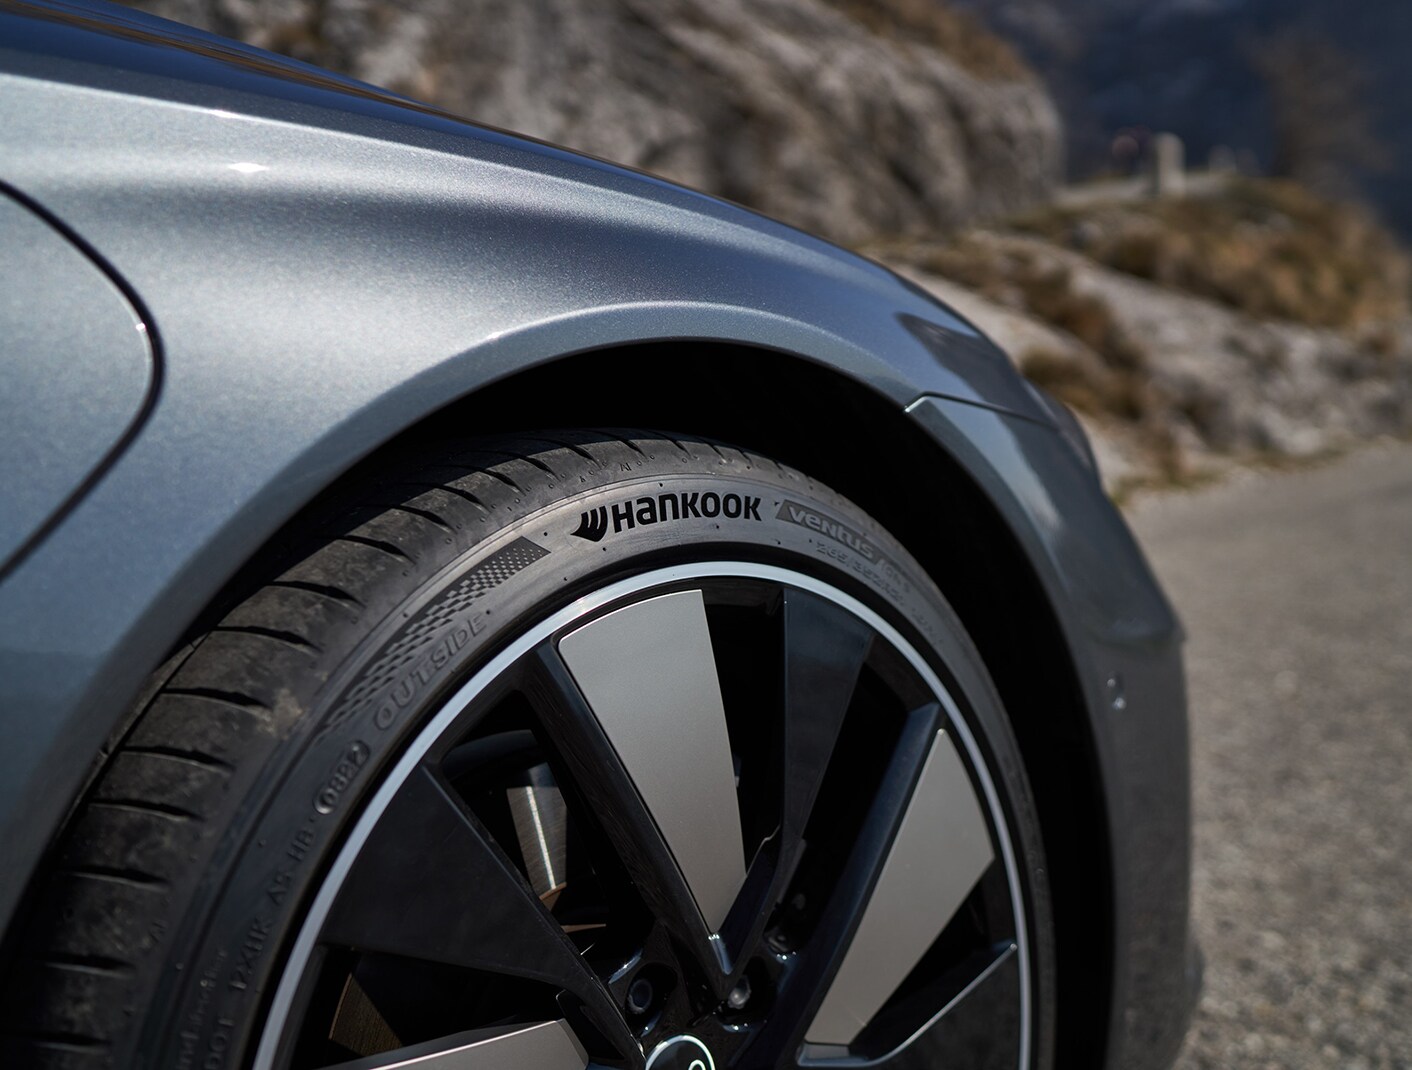 Hankook Ventus iON S: new summer tire for e-cars to join global tire family